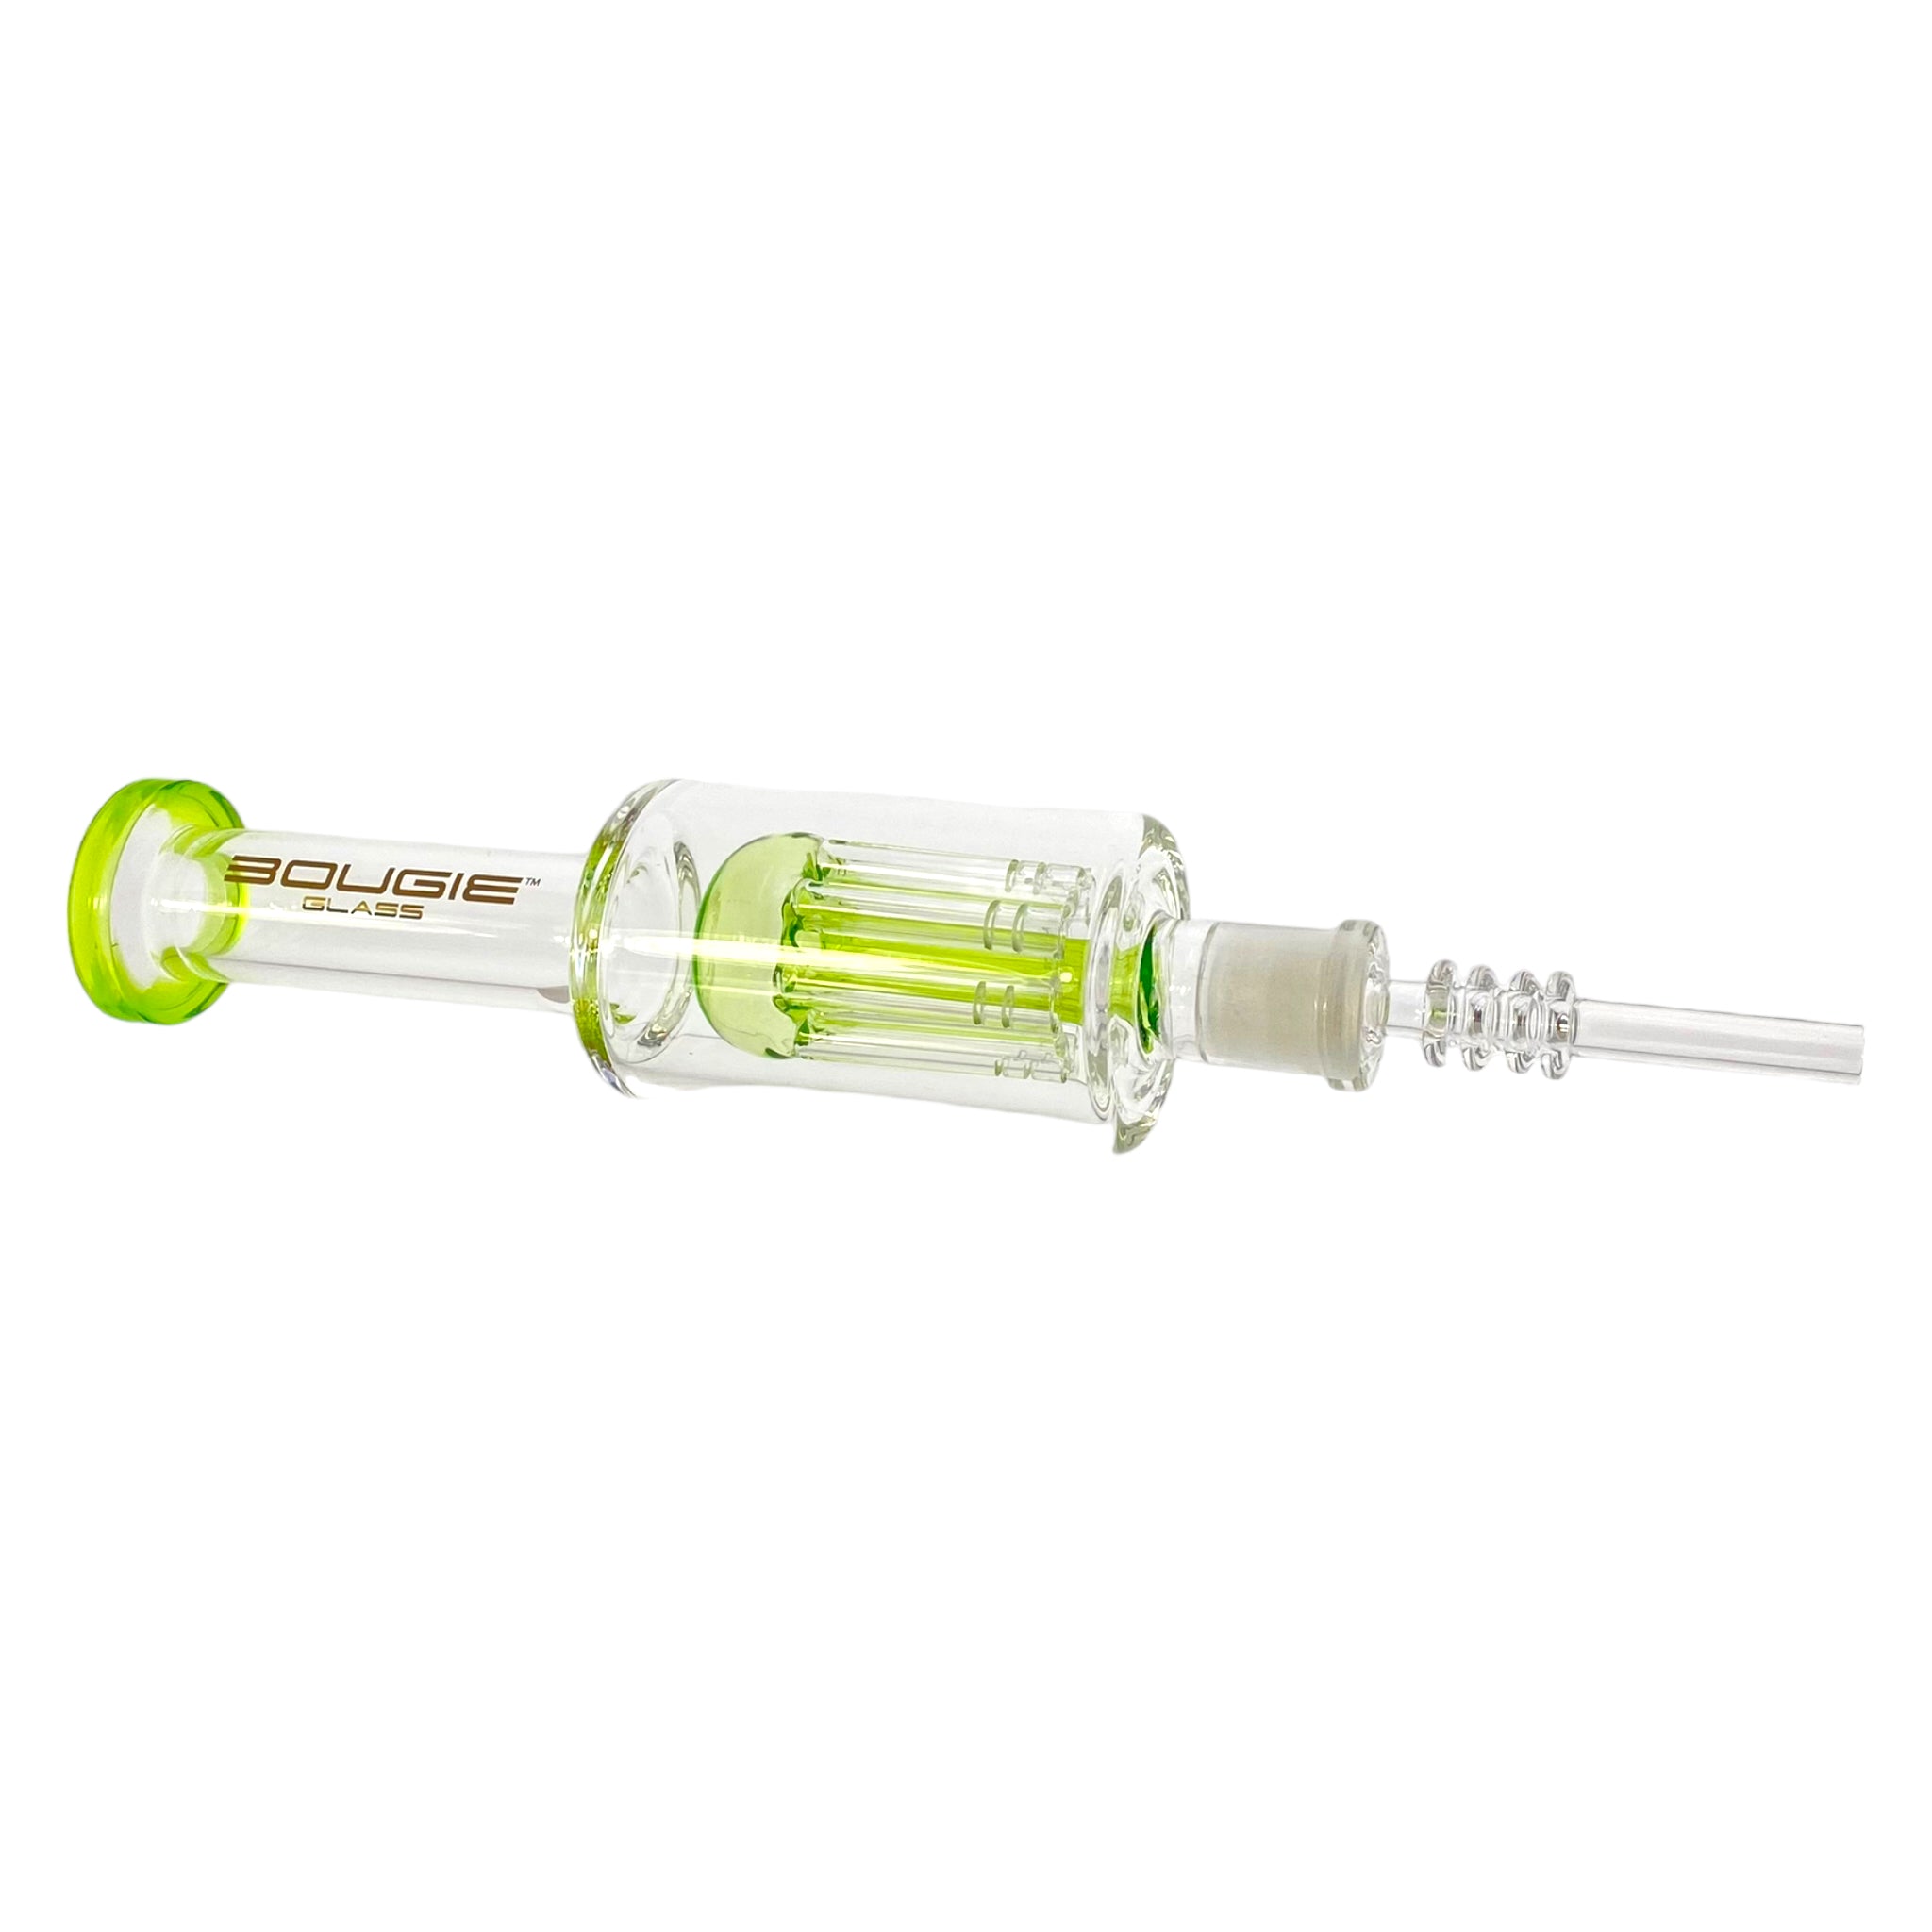 american made Bougie Glass - Green Nectar Collector With 8 Arm Tree Perc